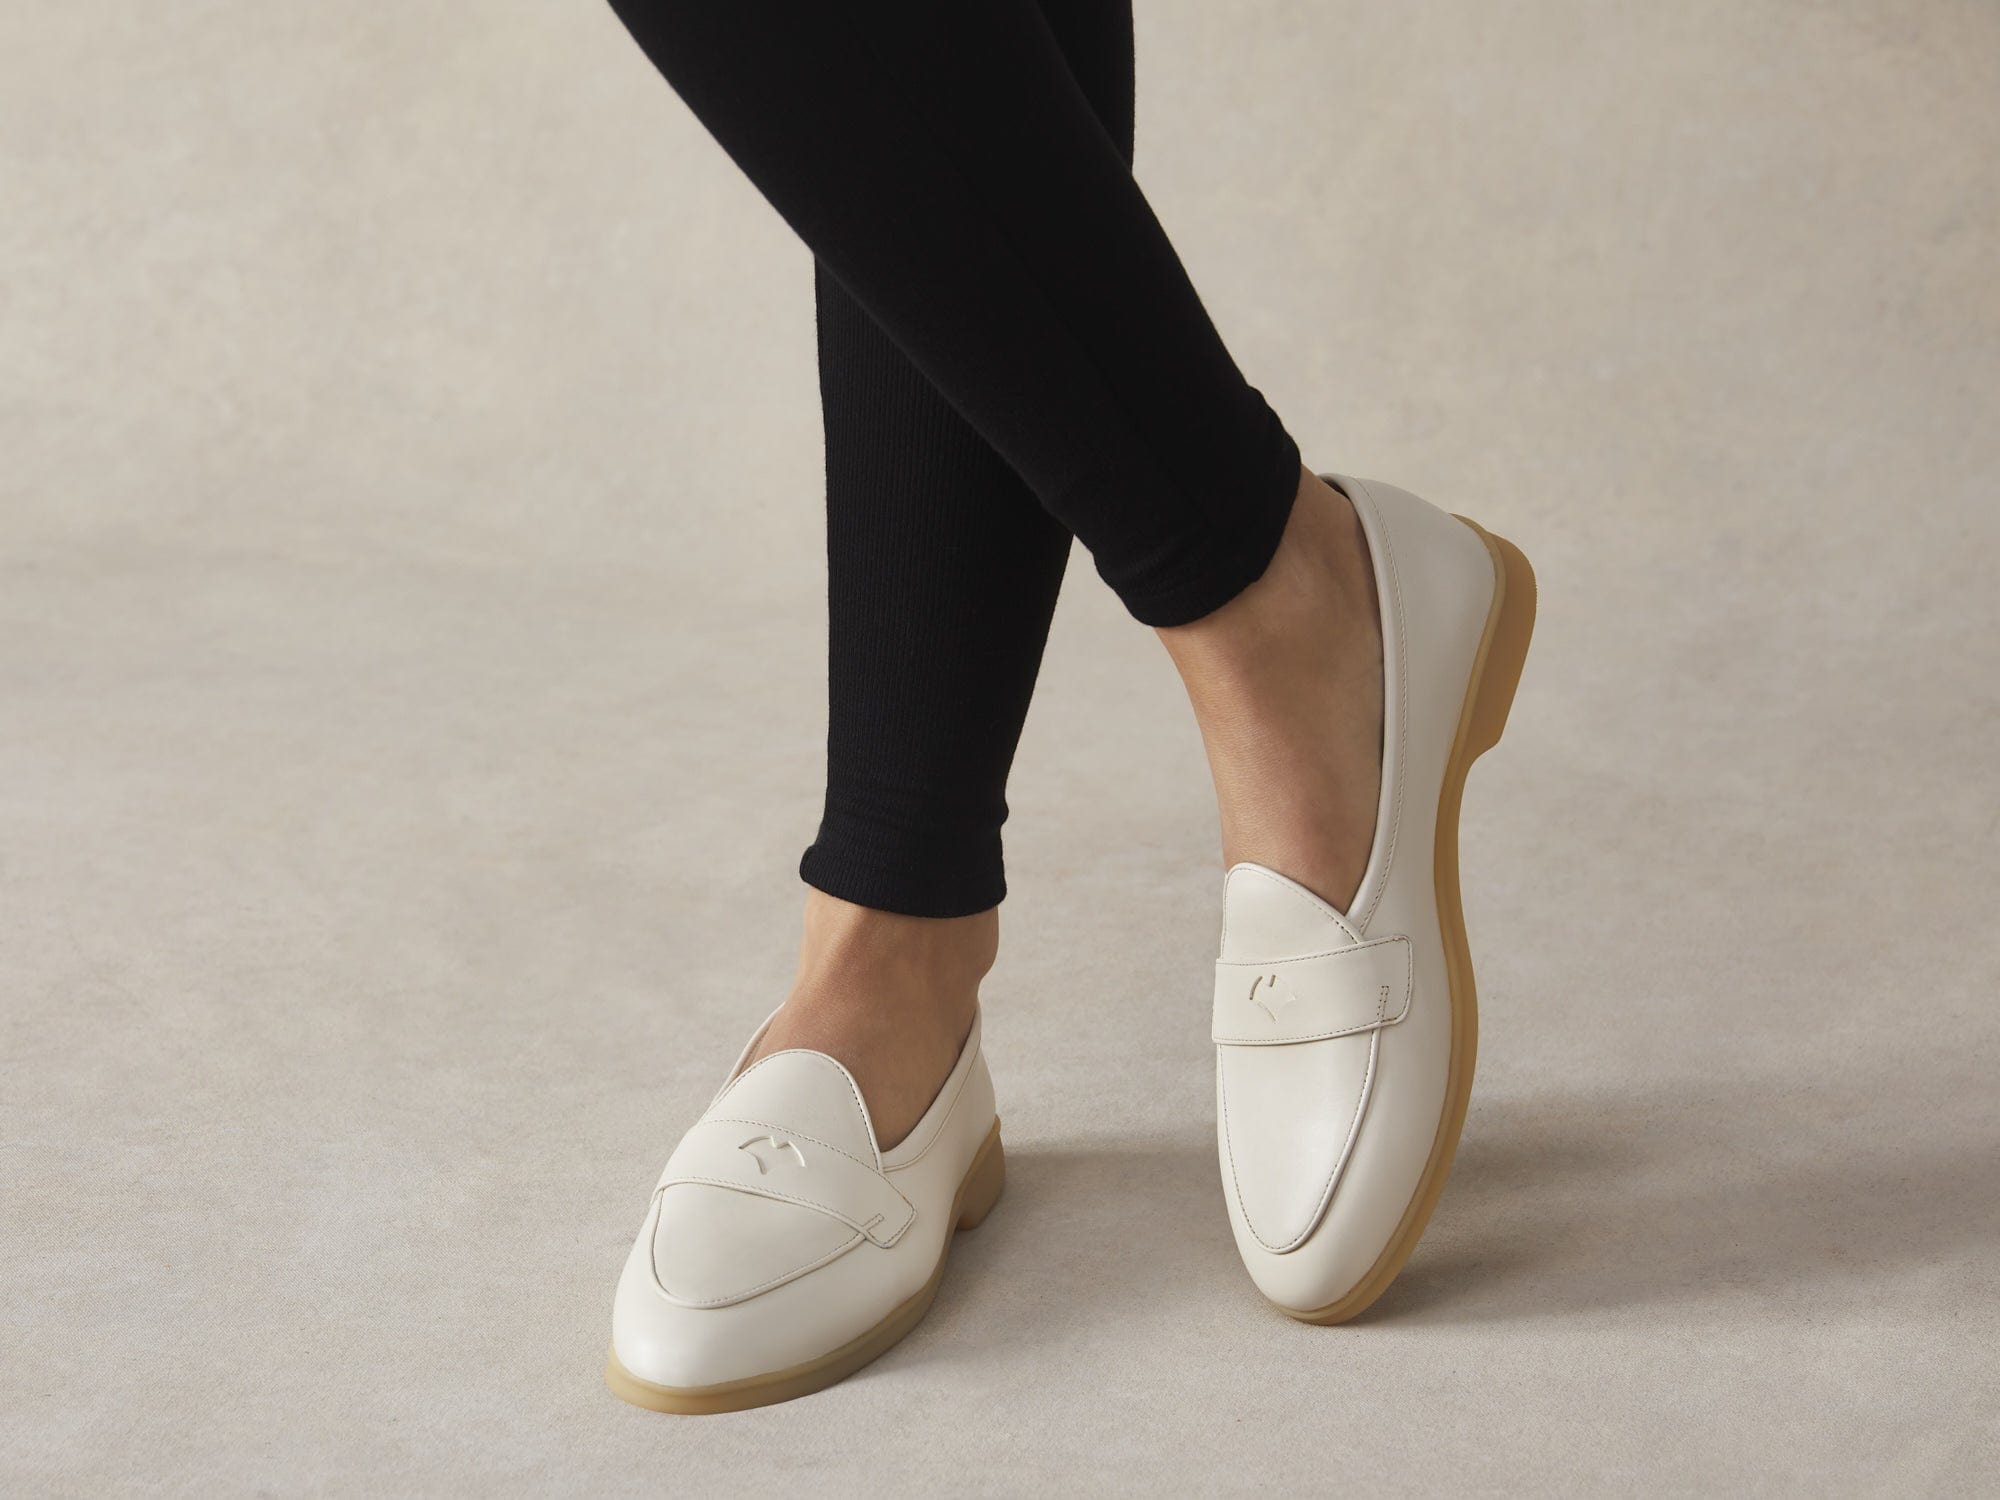 Stride Penny Loafers in Blanc Casse Milled Calf